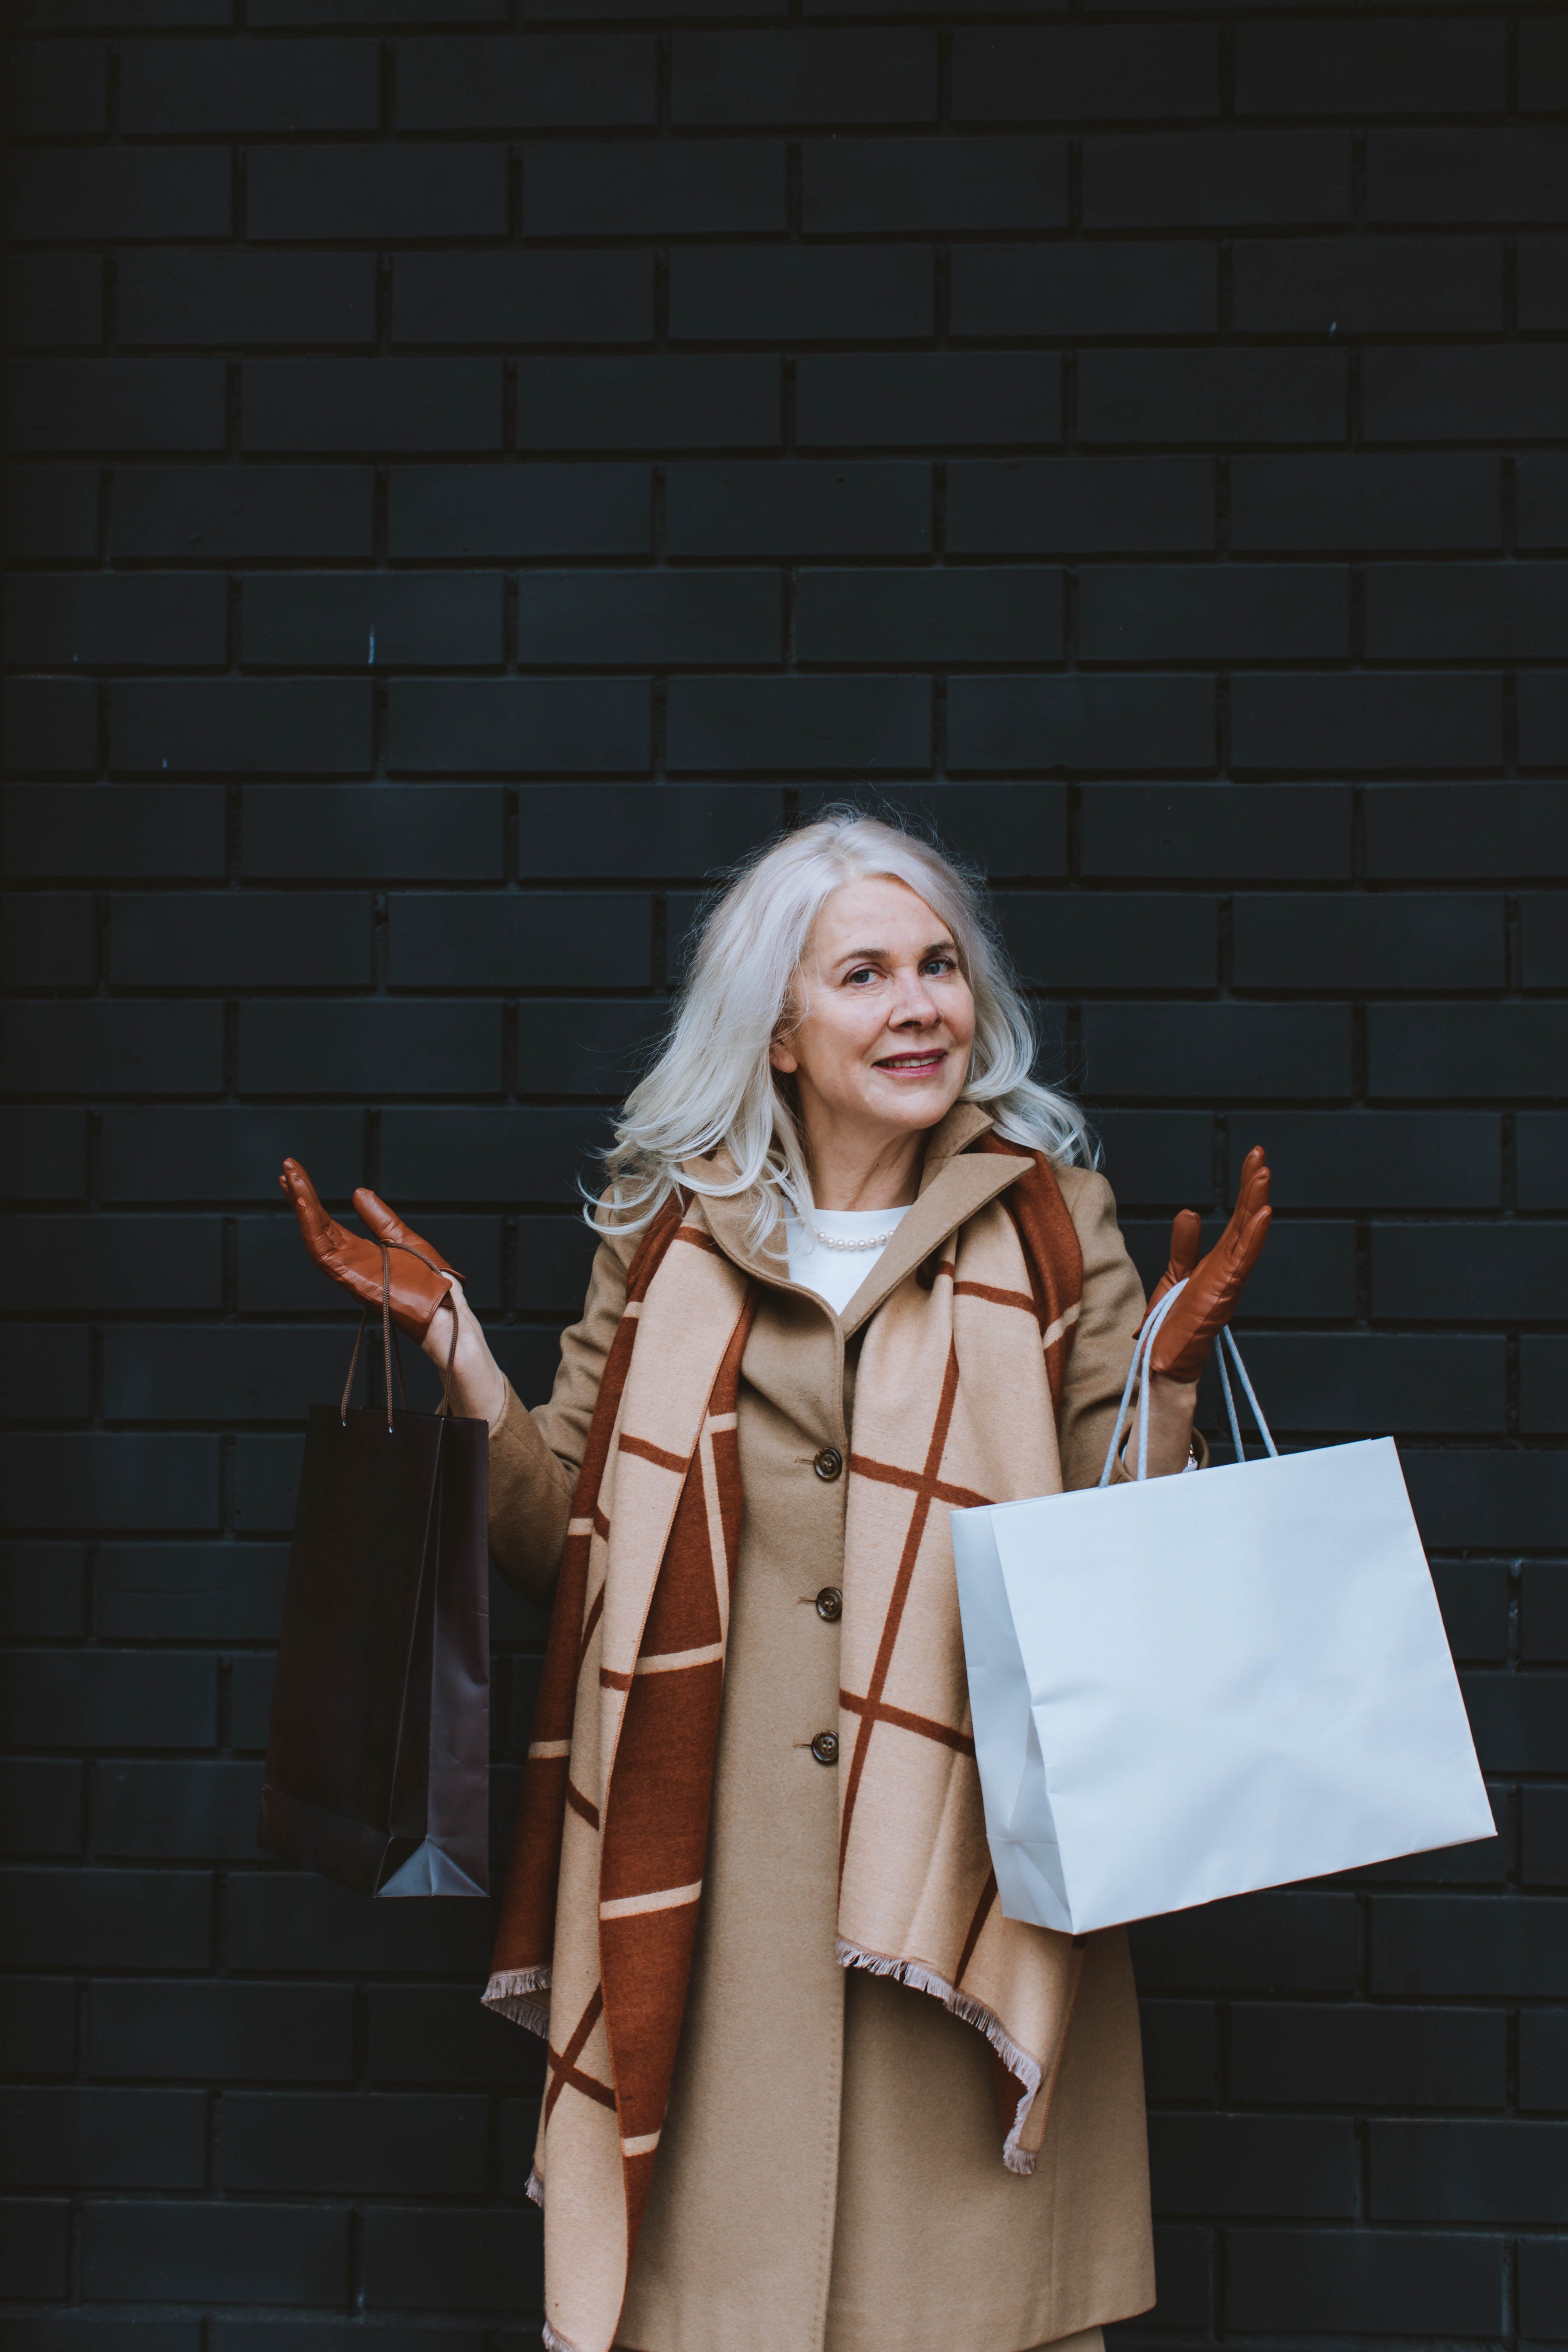 Debra headed to a mall and got herself several beautiful dresses, one of which she decided to go home in. | Source: Pexels